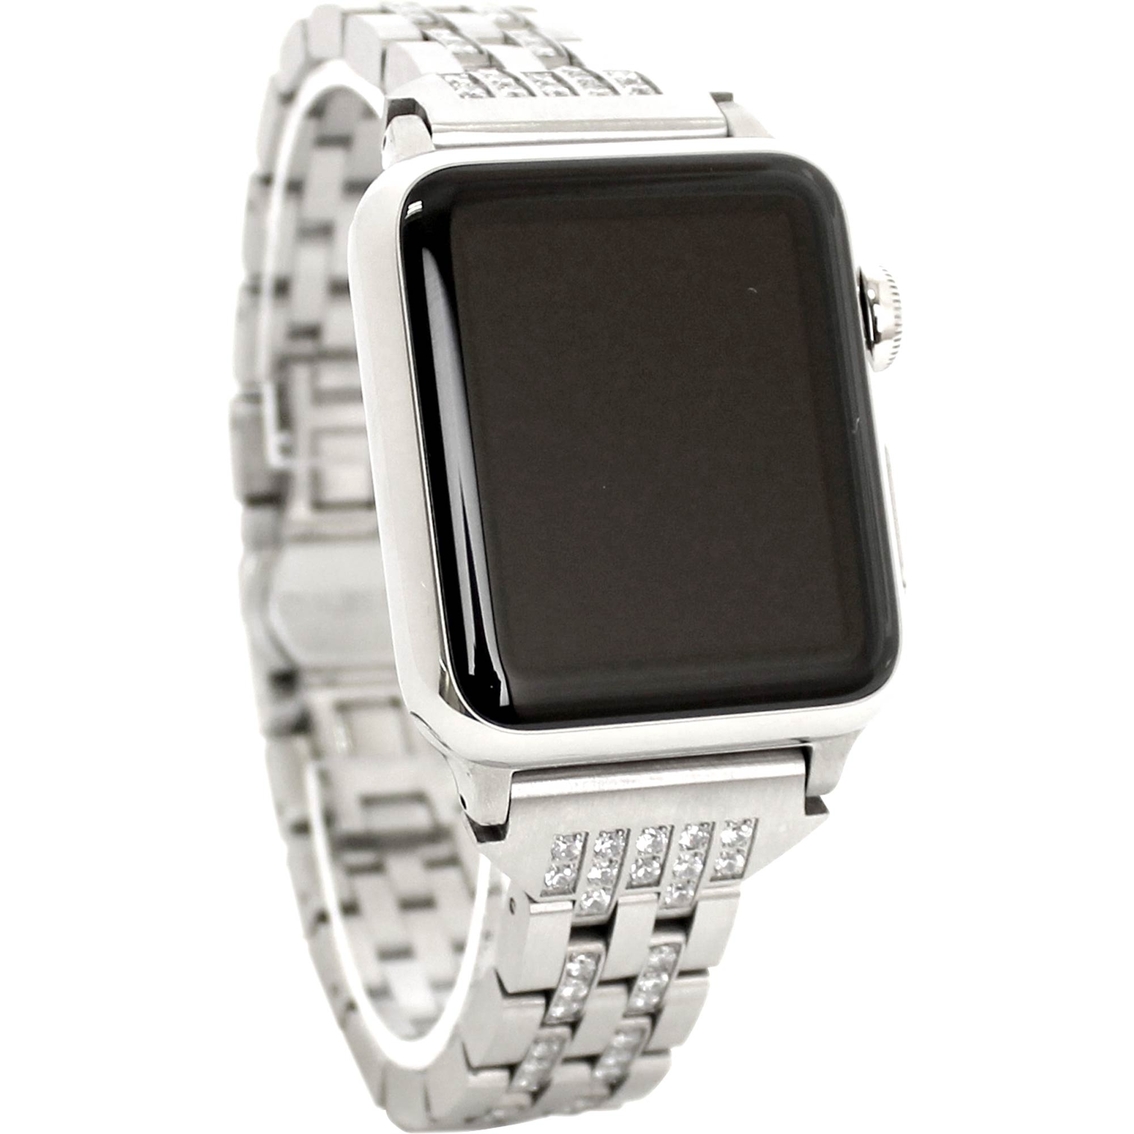 iBand Pro Watchband for Apple Watches - Image 2 of 2